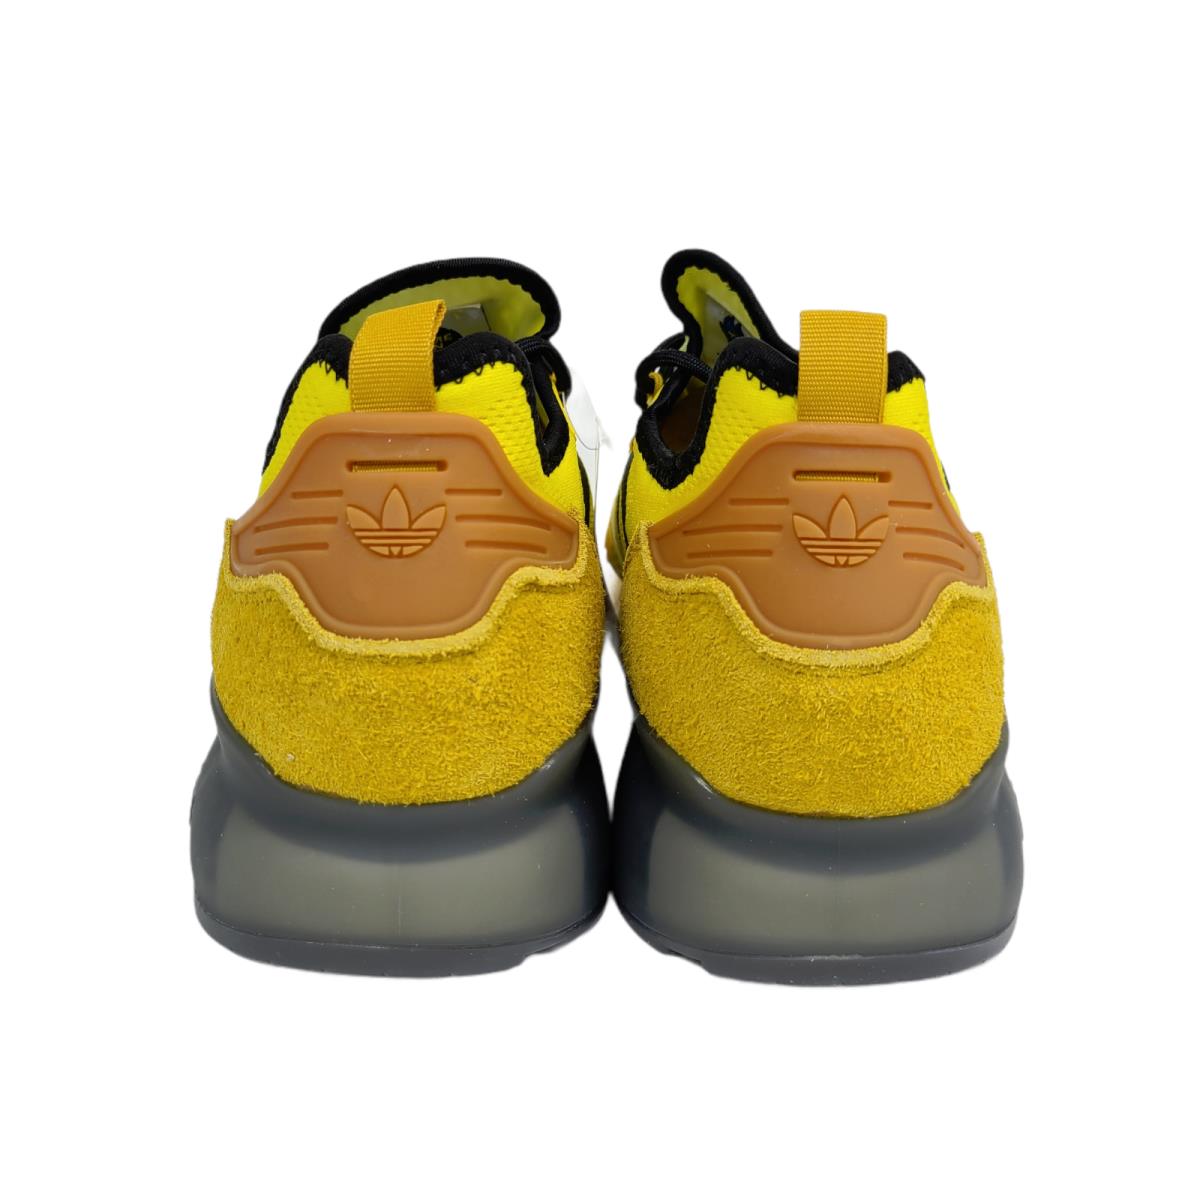 Adidas shoes Boost - Yellow 23